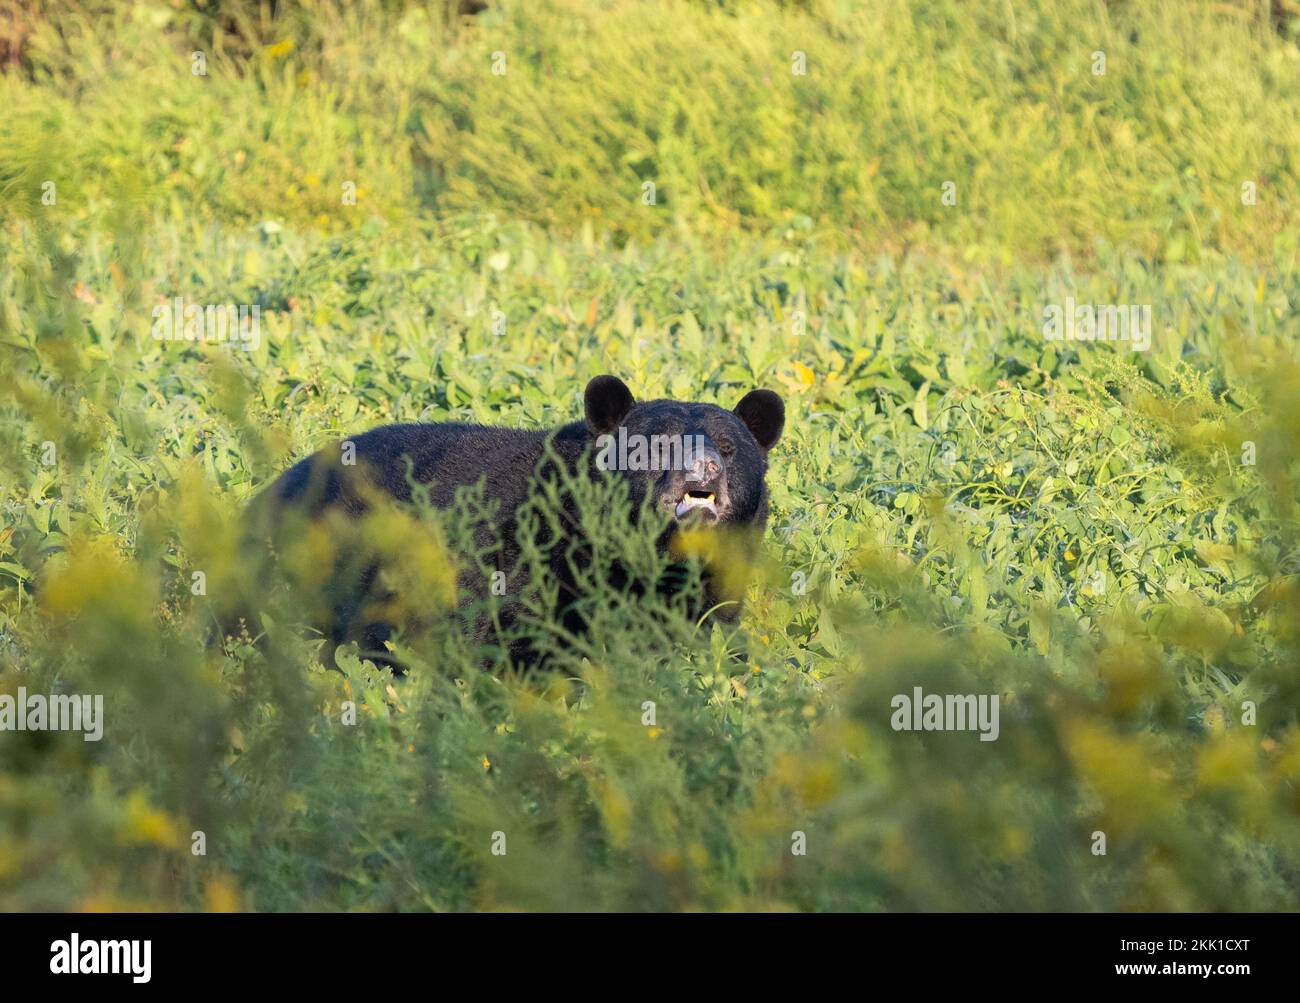 American Black Bear (Ursus americanus) in field of goldenrod with mouth open Stock Photo